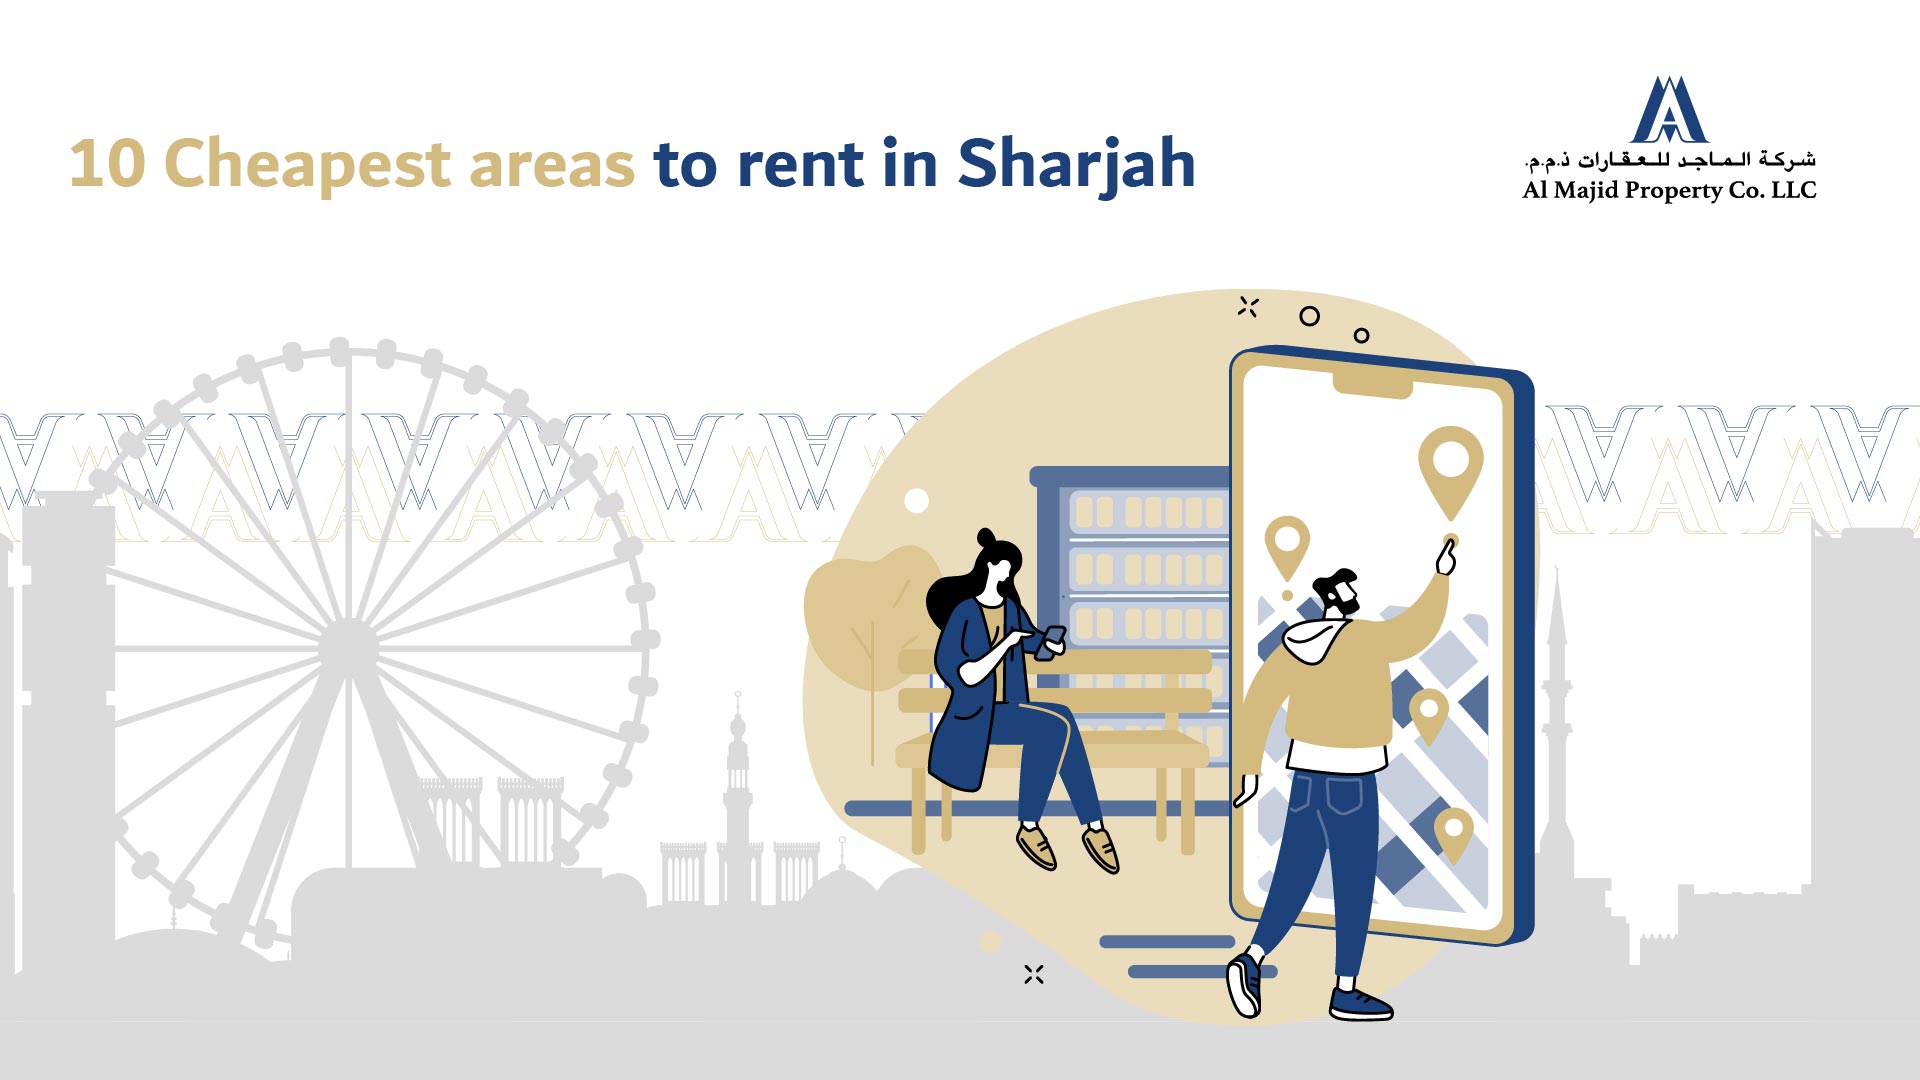 Cheapest areas to rent in Sharjah